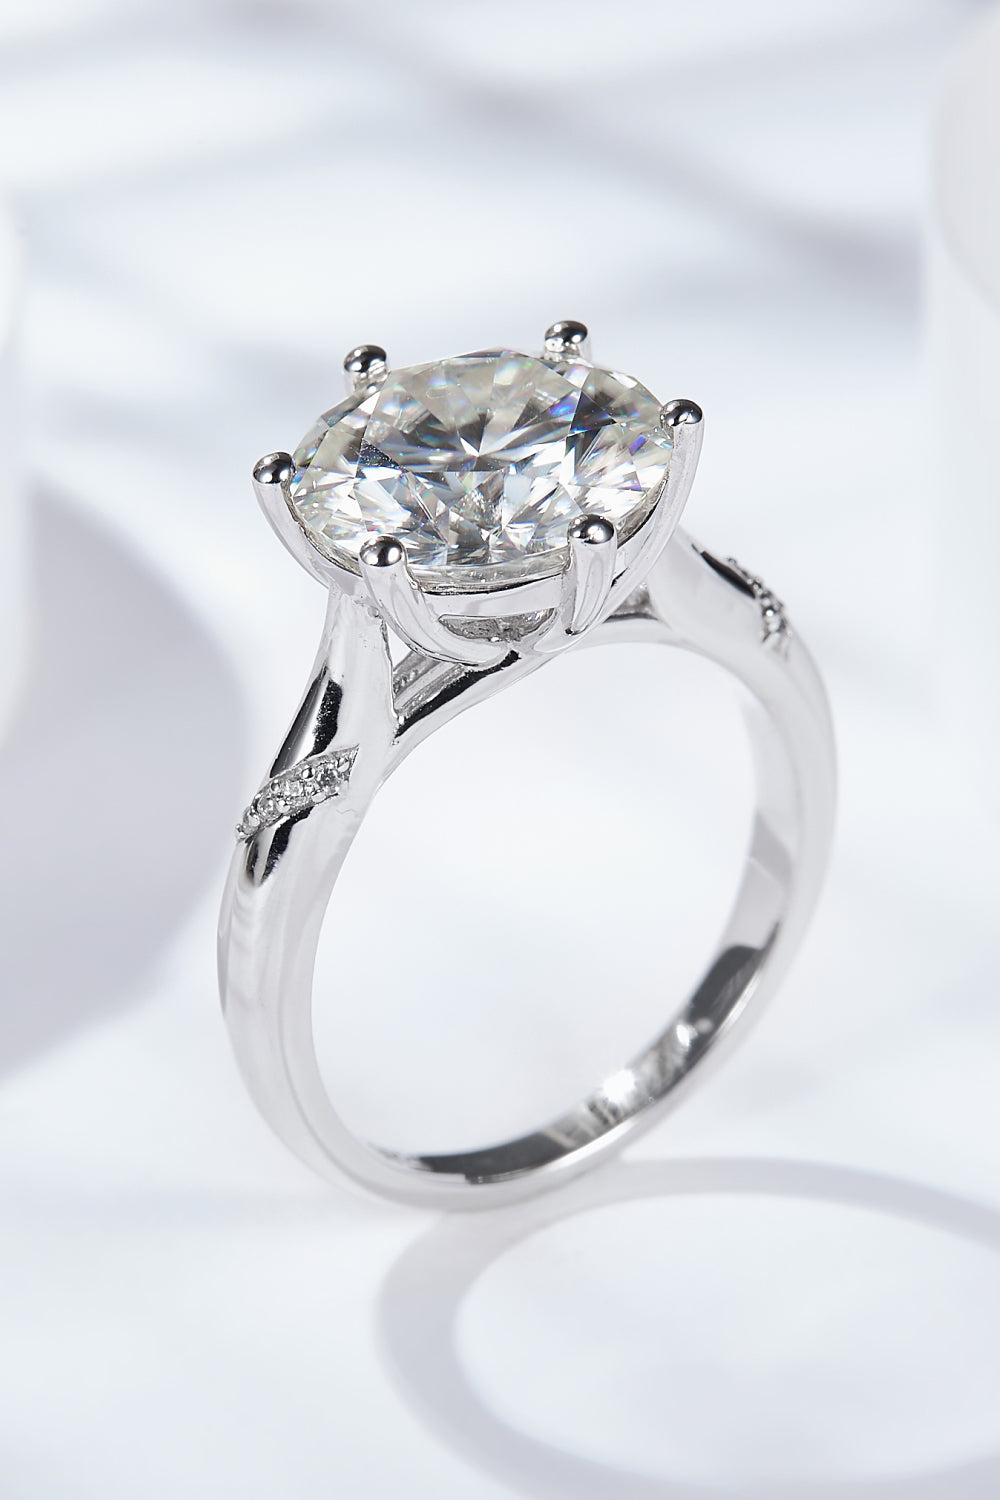 5 Carat Brilliant Round Cut Moissanite Solitaire Ring (Platinum Over Pure Sterling Silver)